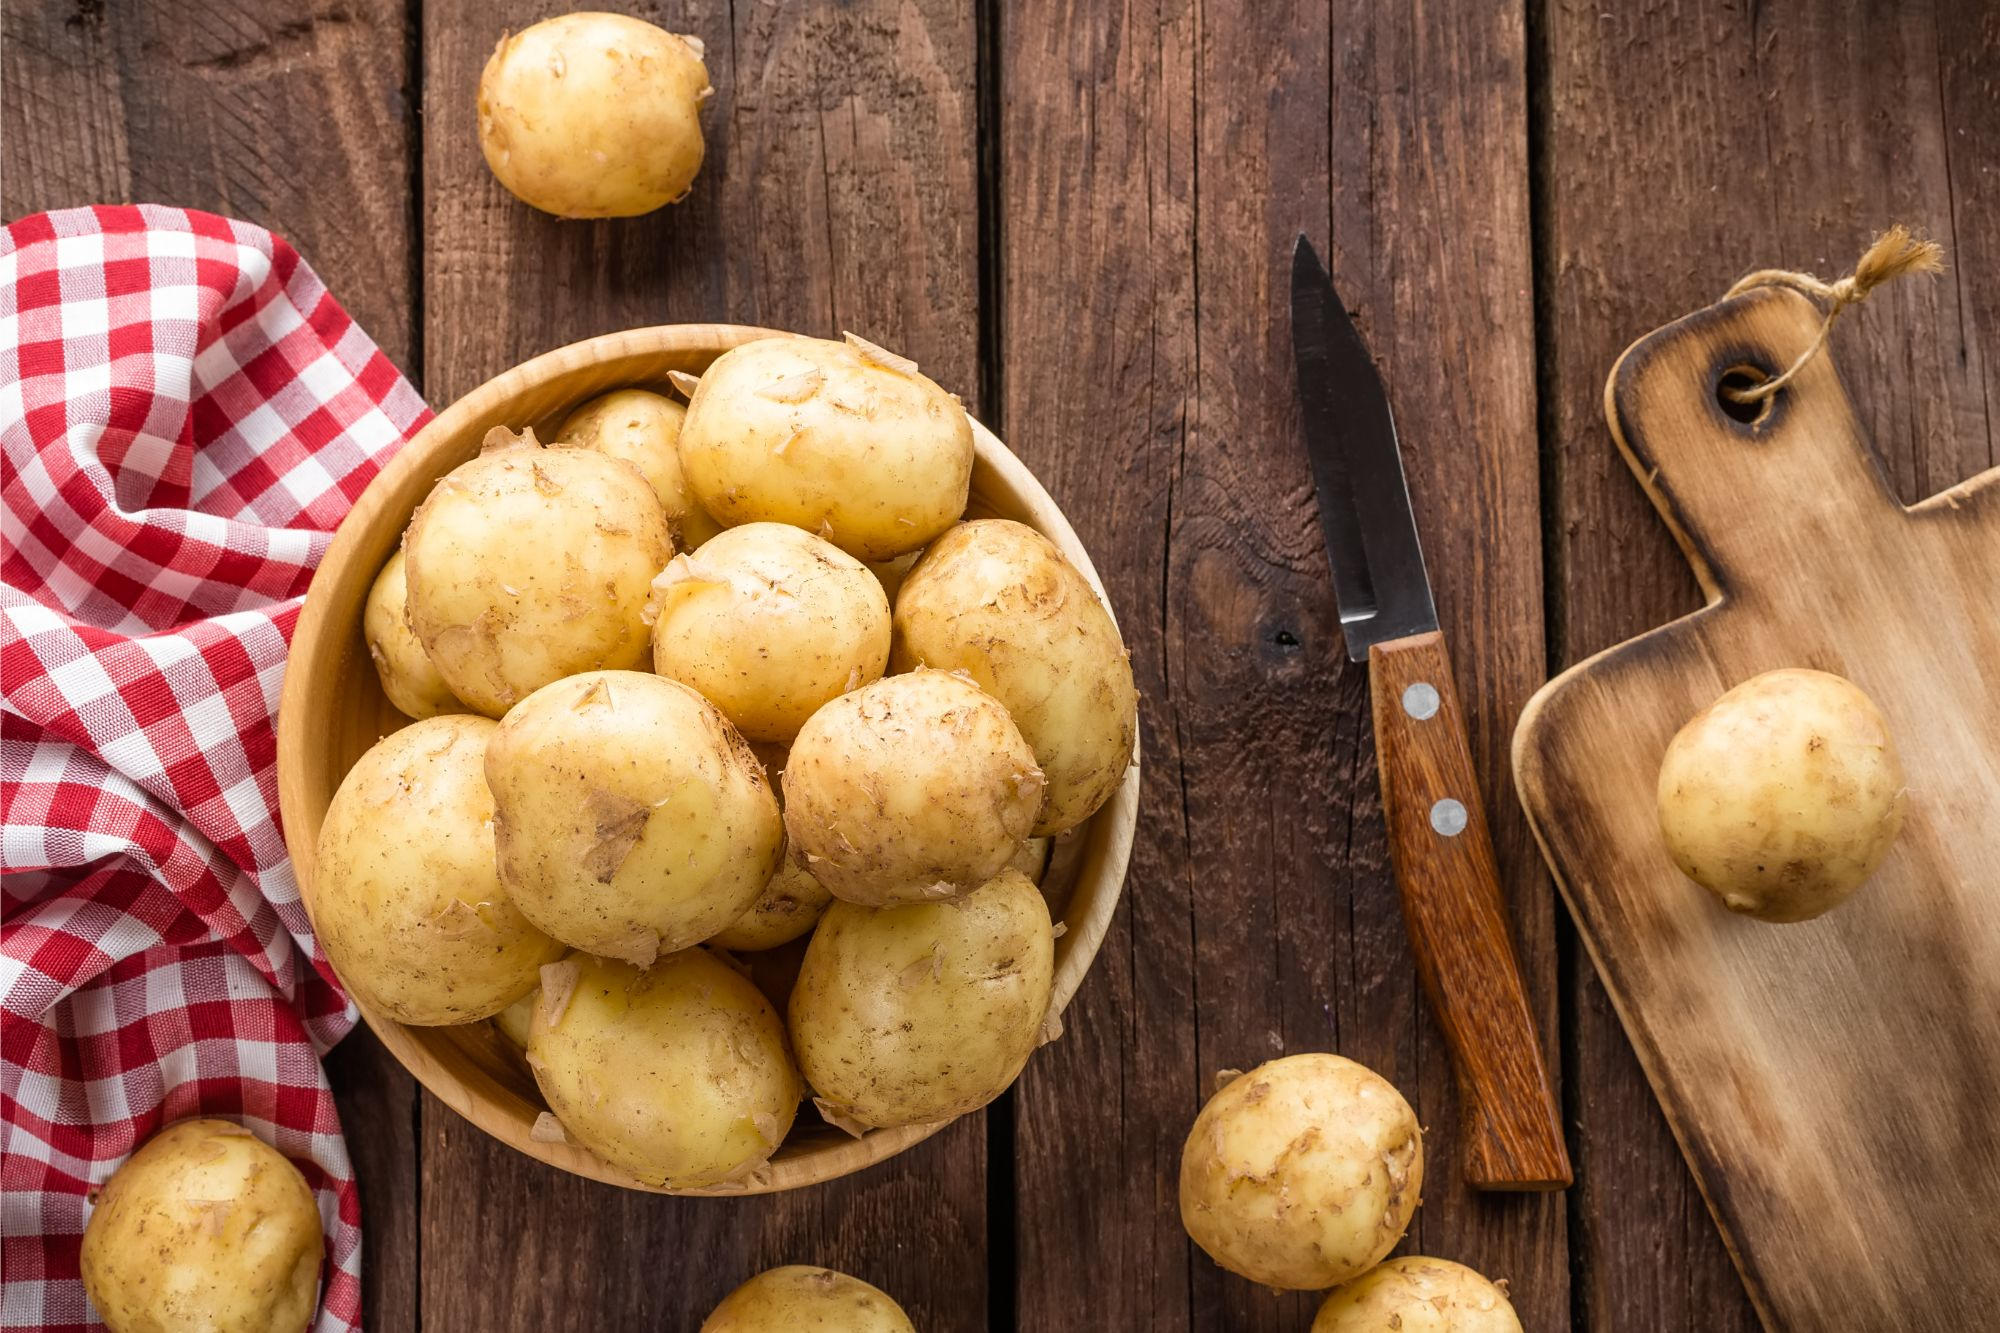 Debunking Previous Misconceptions: New Study Indicates That Potatoes Are Healthier Than You Think thumbnail